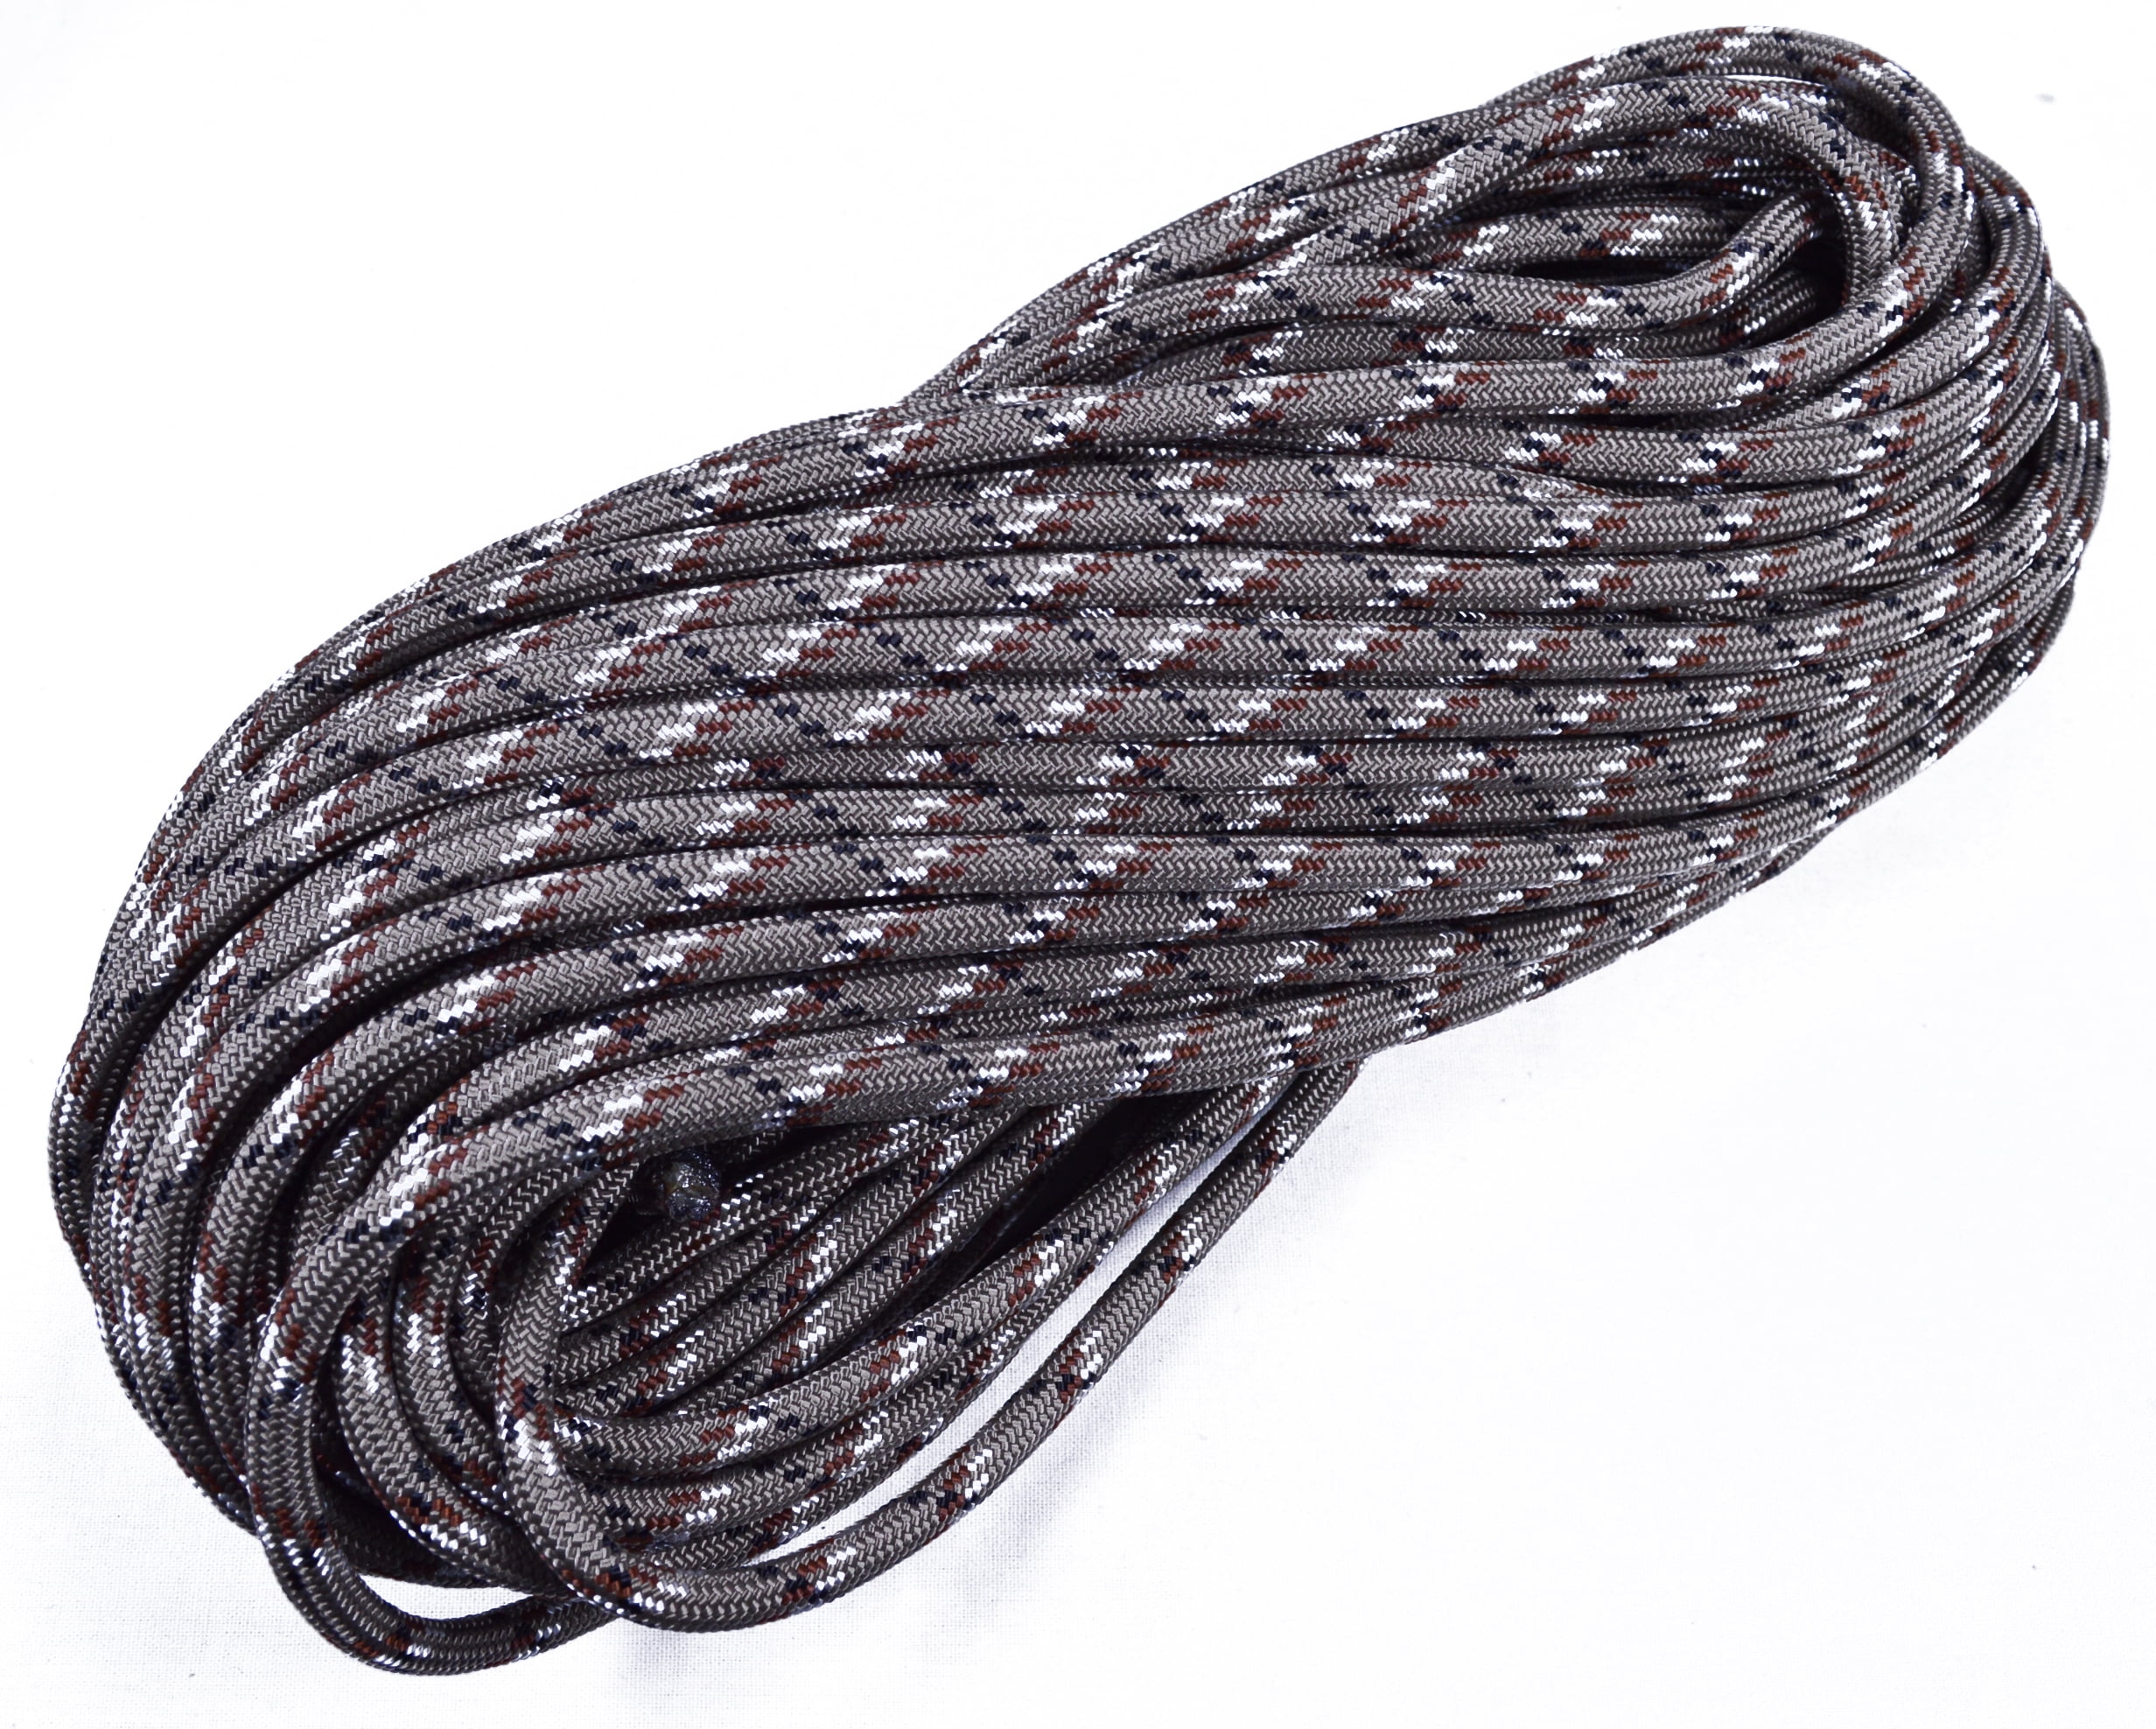 ParaMax Paracord - The strongest paracord on the planet - Made in the USA